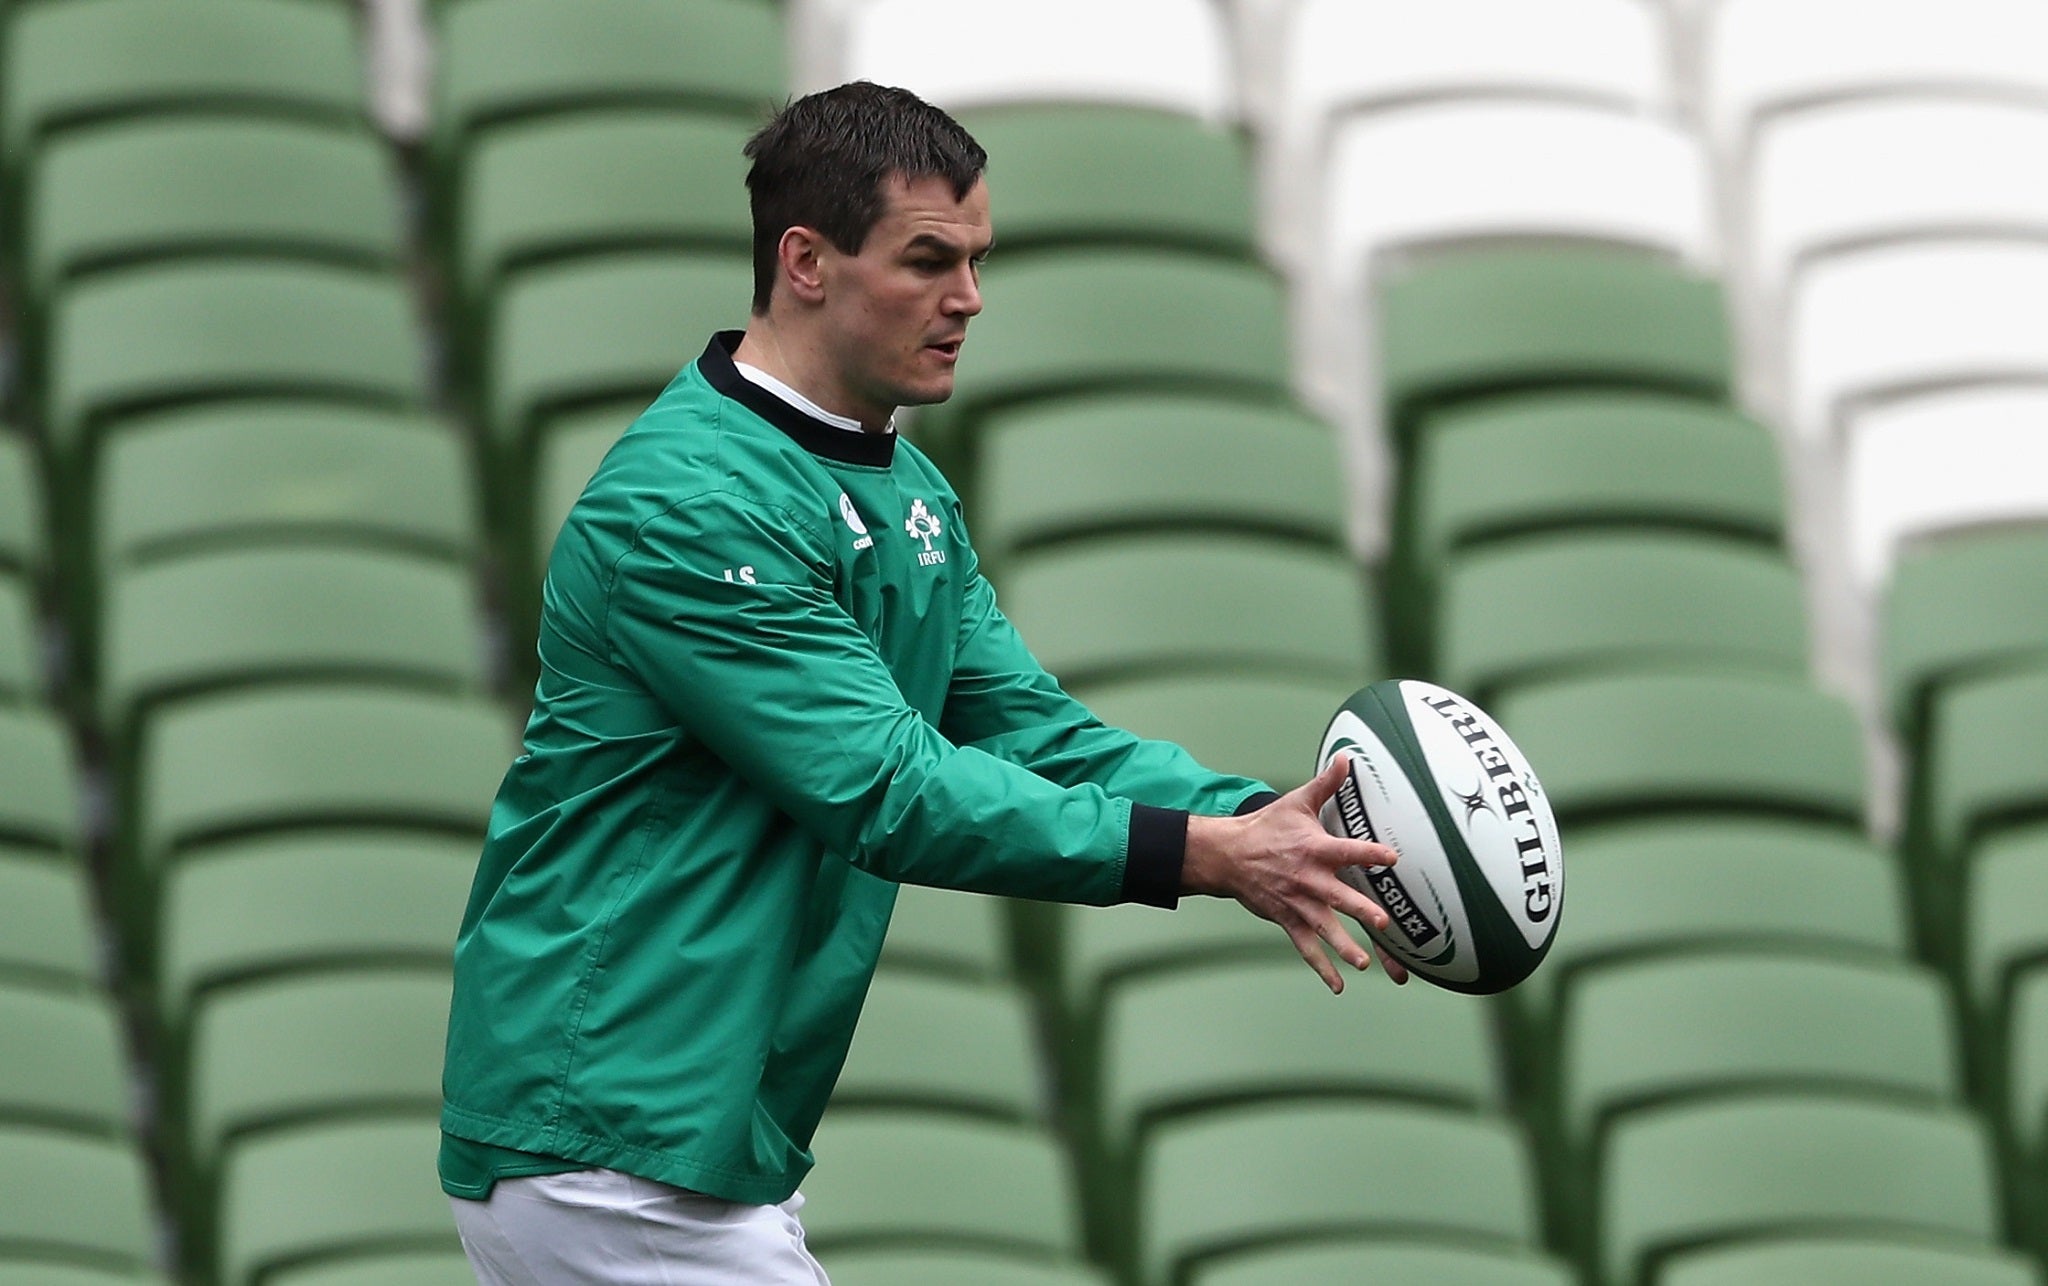 Jonathan Sexton believes Ireland have what it takes to beat England, but need to start producing it consistently